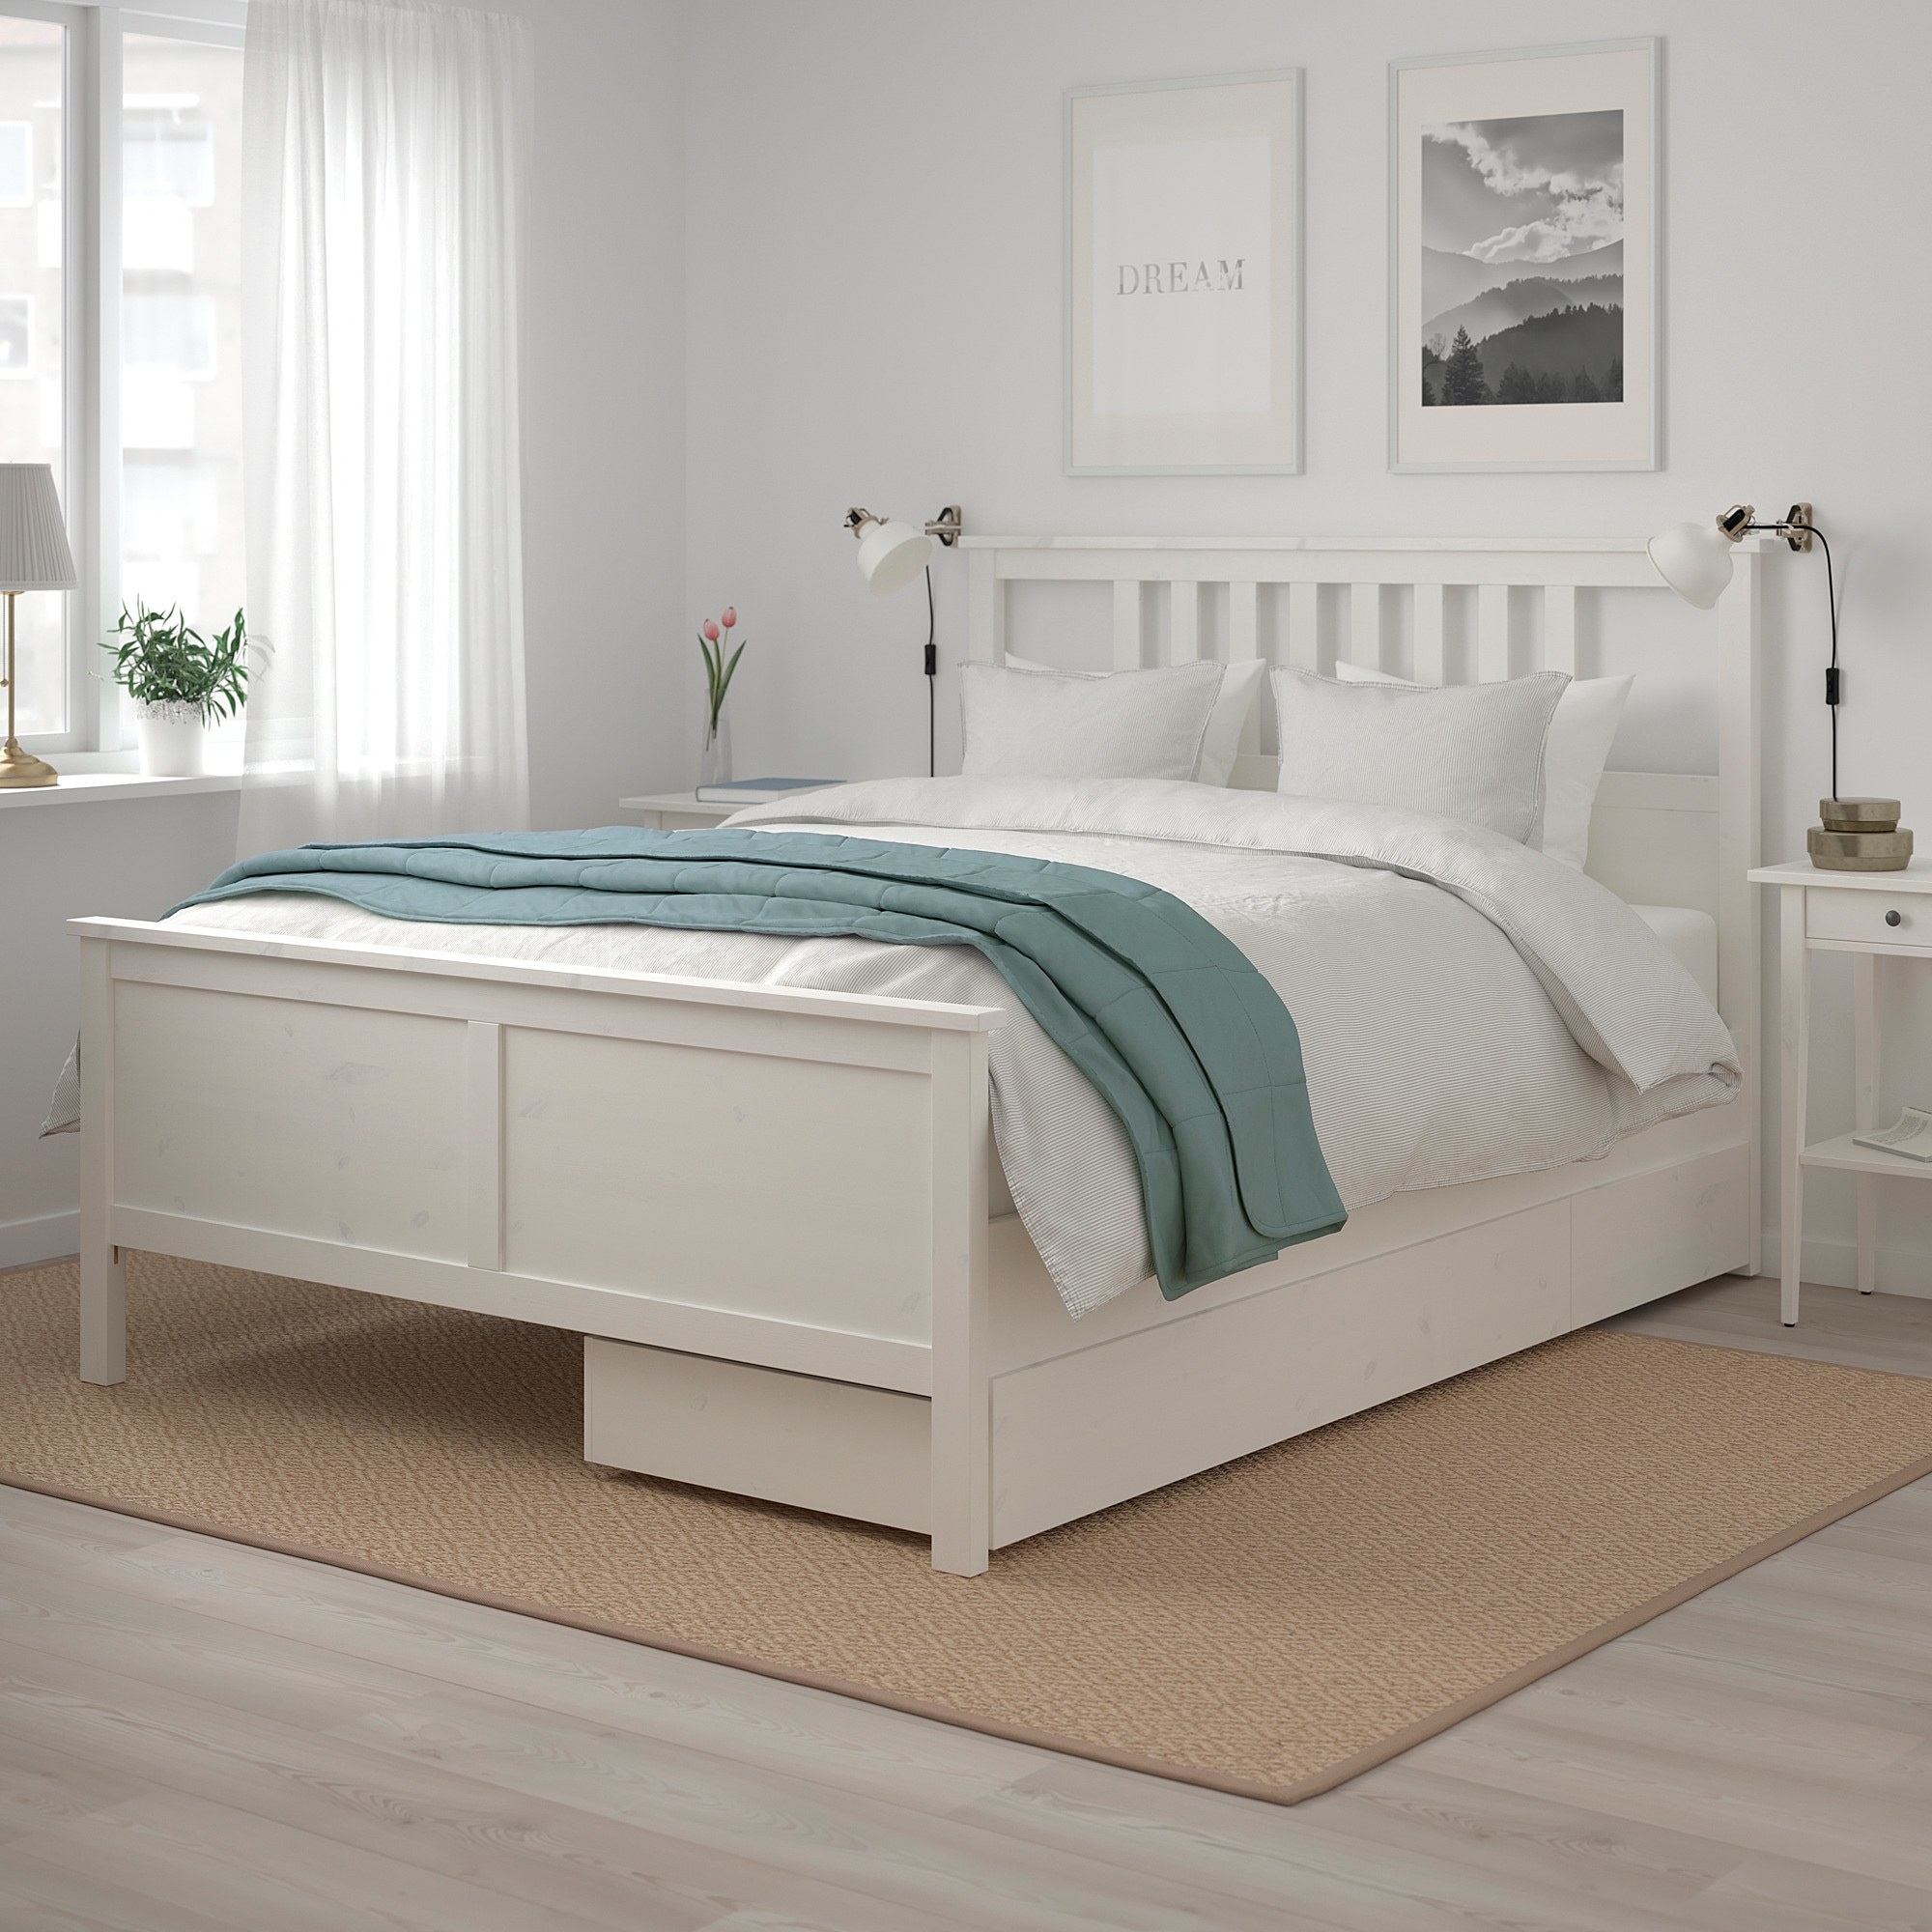 27 Bed Frames That Only Look, Cal King Bed Frame With Storage Ikea